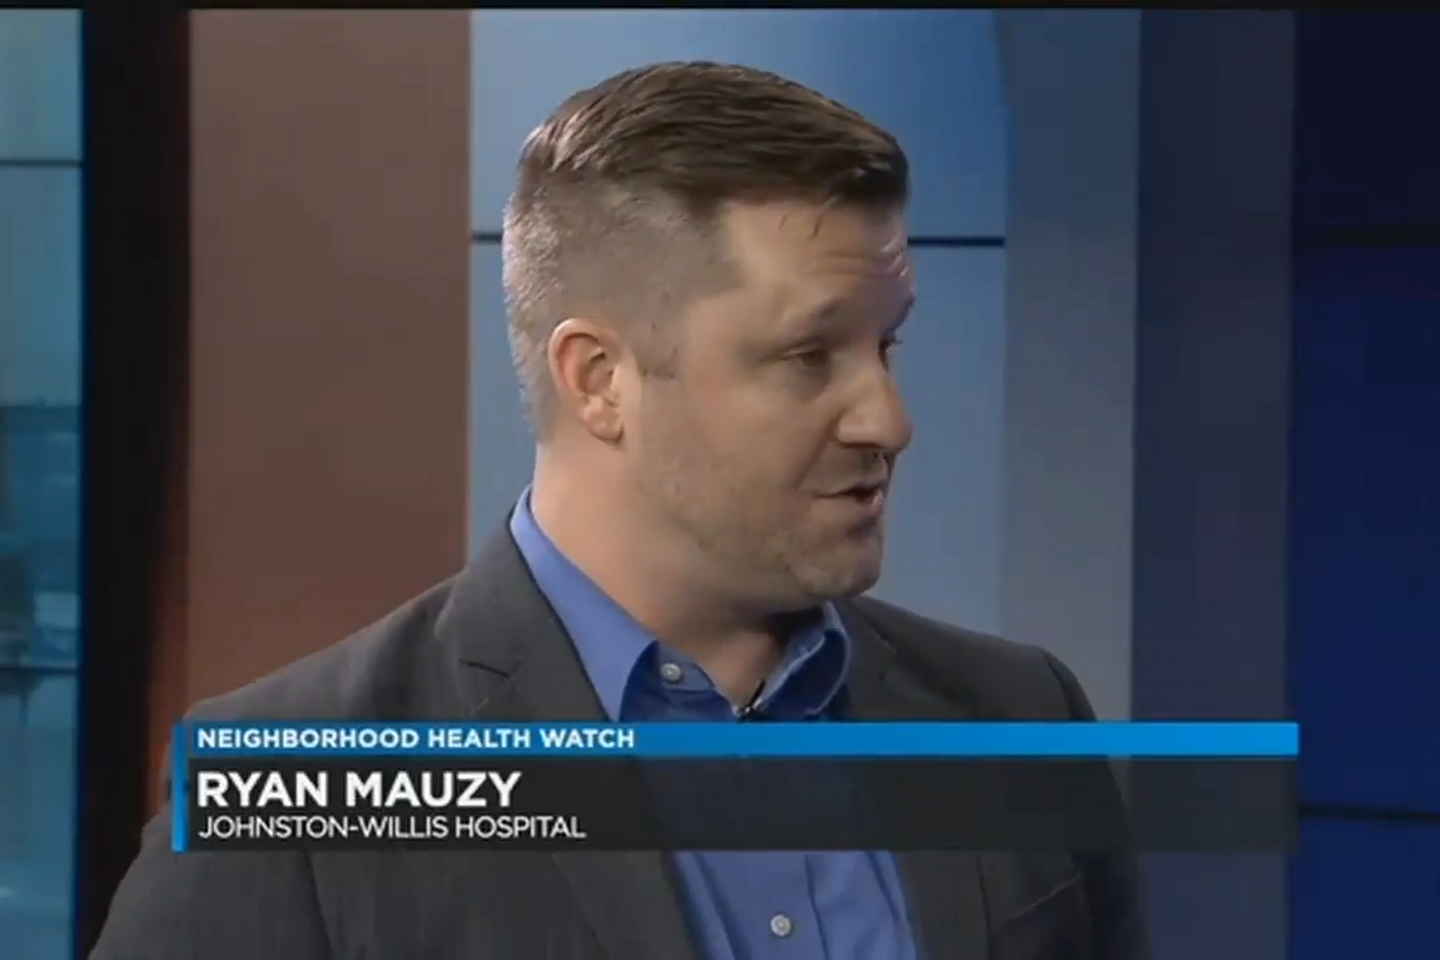 Ryan Mauzy wears a grey blazer and light blue button up shirt while speaking in a television studio as a lower-third graphic reads " Neighborhood Health Watch, Ryan Mauzy, Johnston-Willis Hospital".  